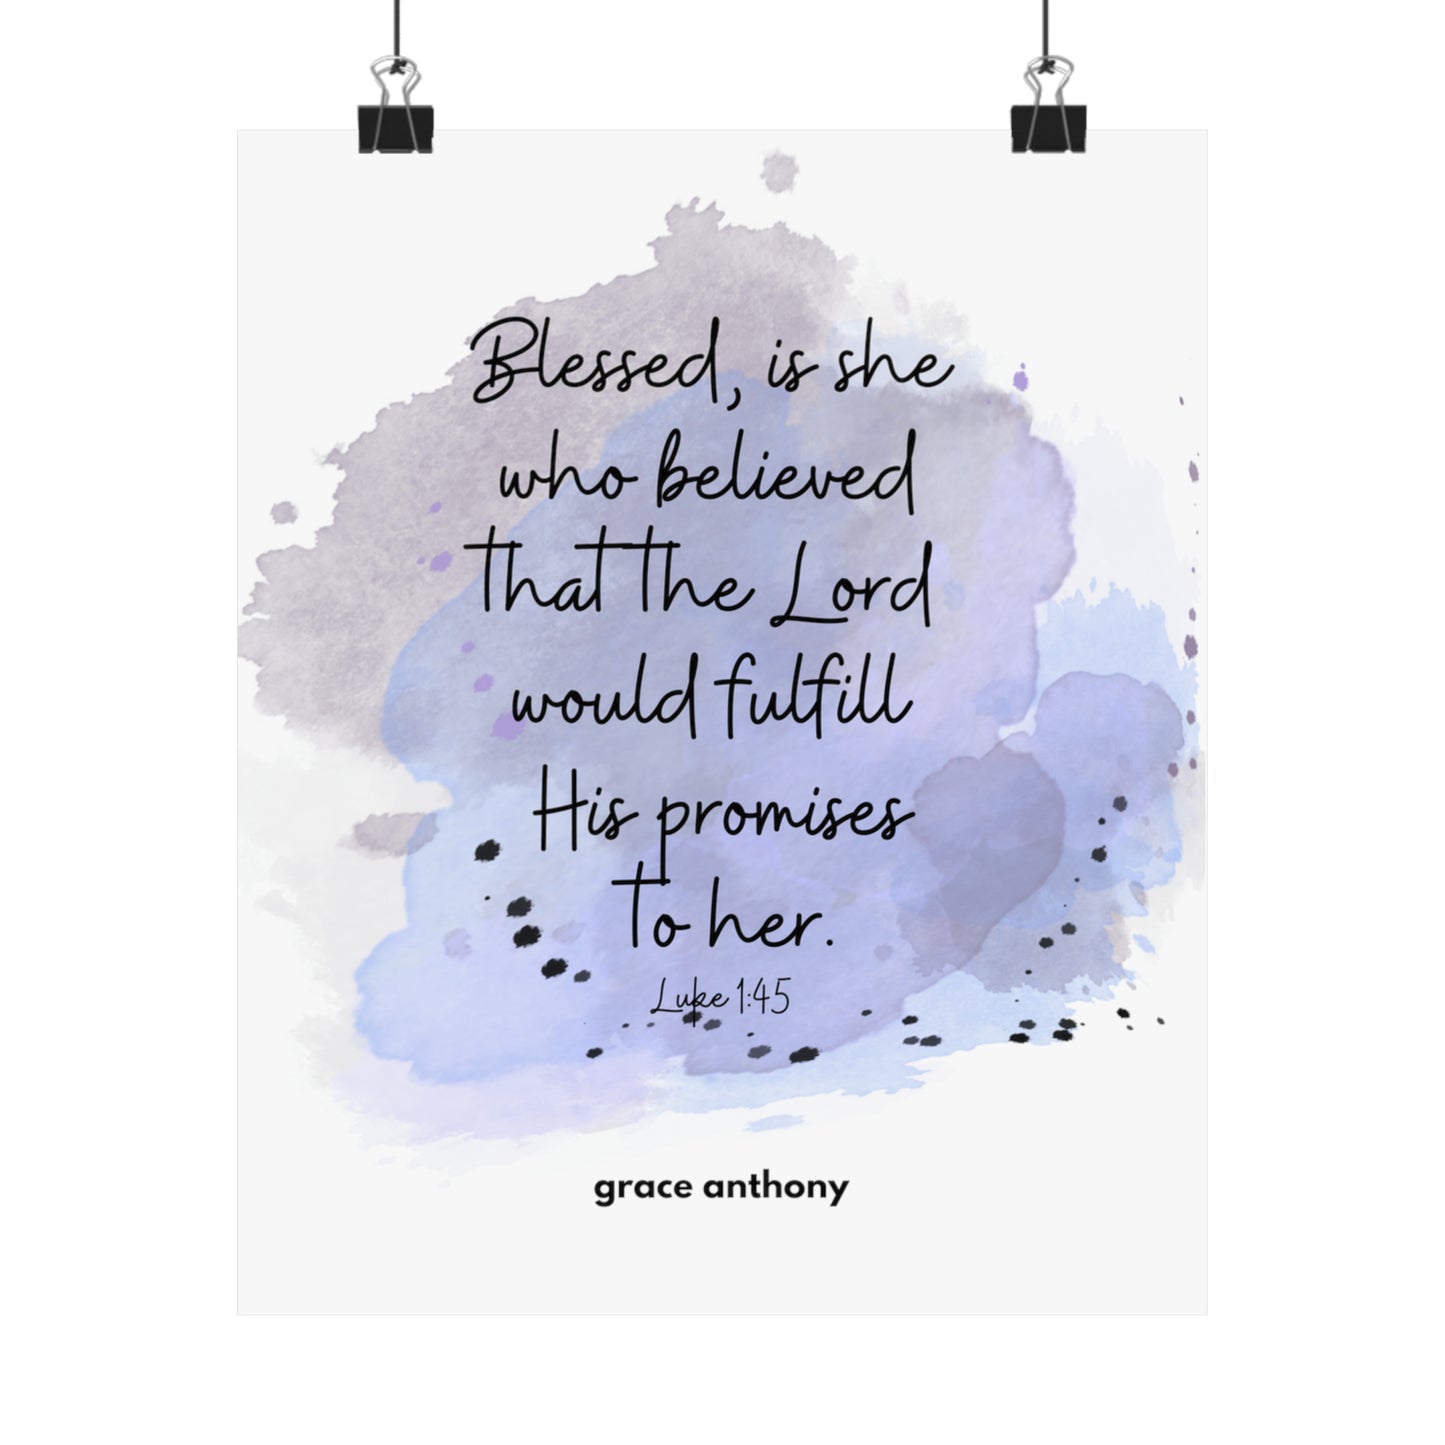 Blessed is She Luke 1:45 Vertical Poster Wall Art Home Decor Gift for Her New Home Gift Bible Study Gift Christmas Holiday Gift